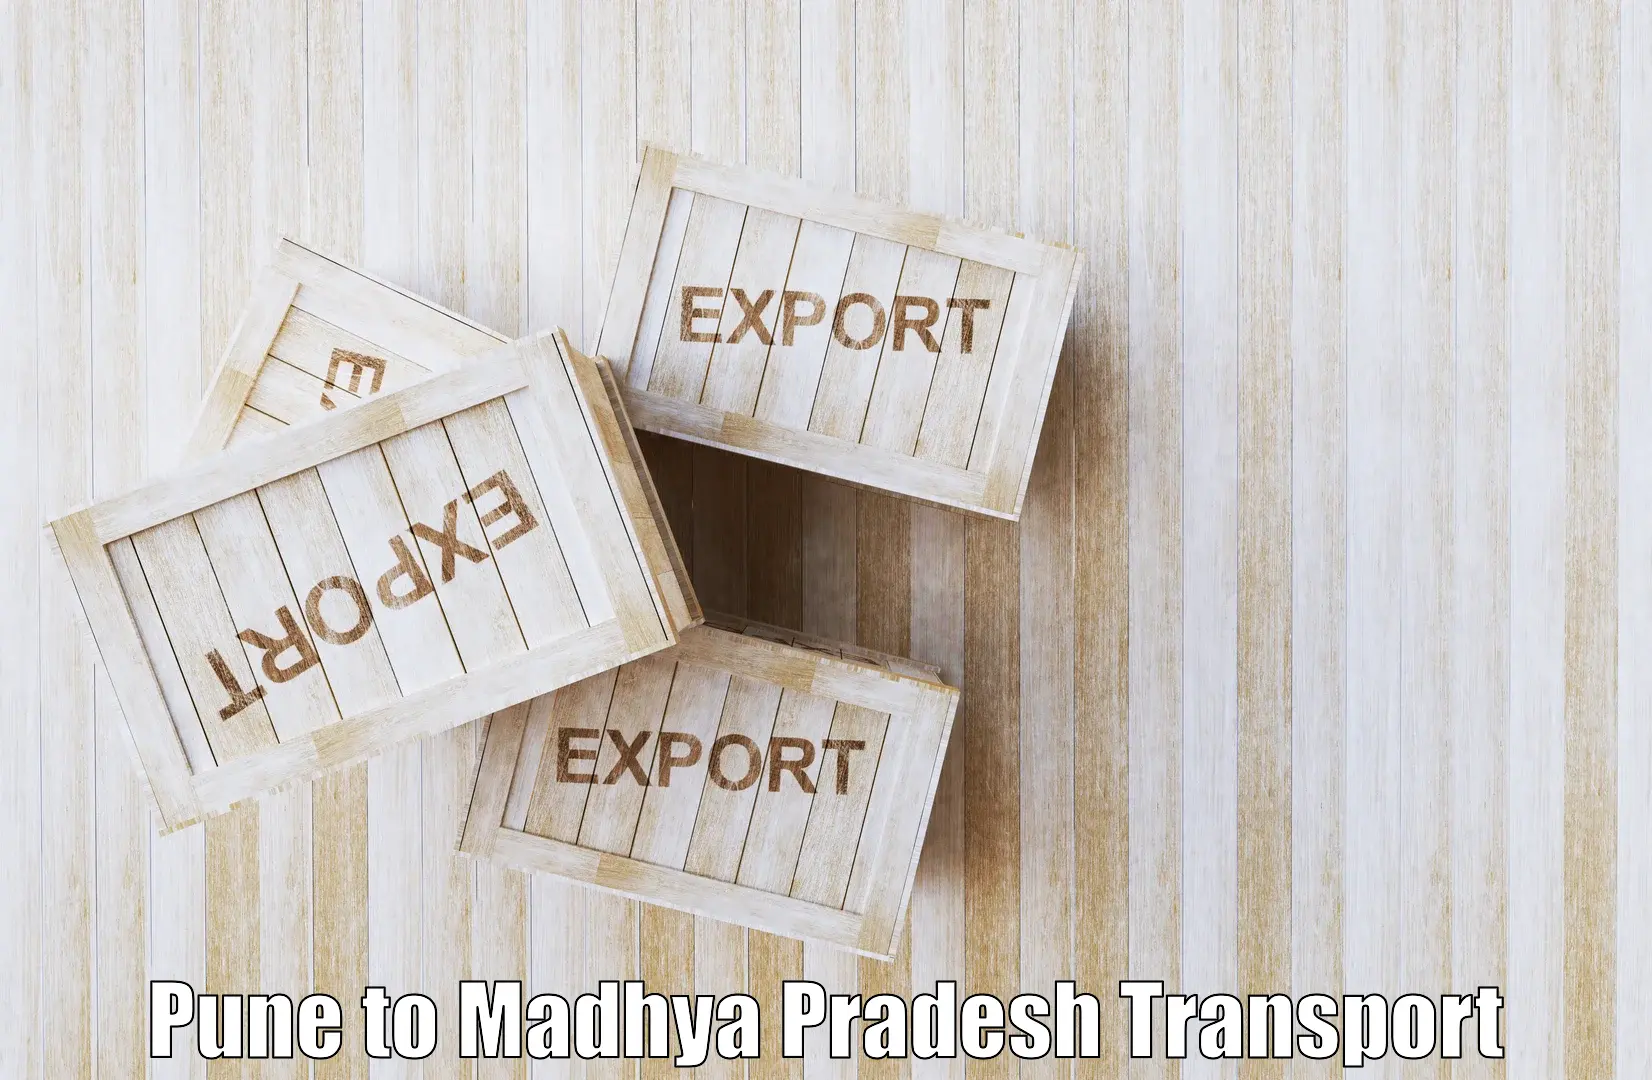 Express transport services in Pune to Gotegaon